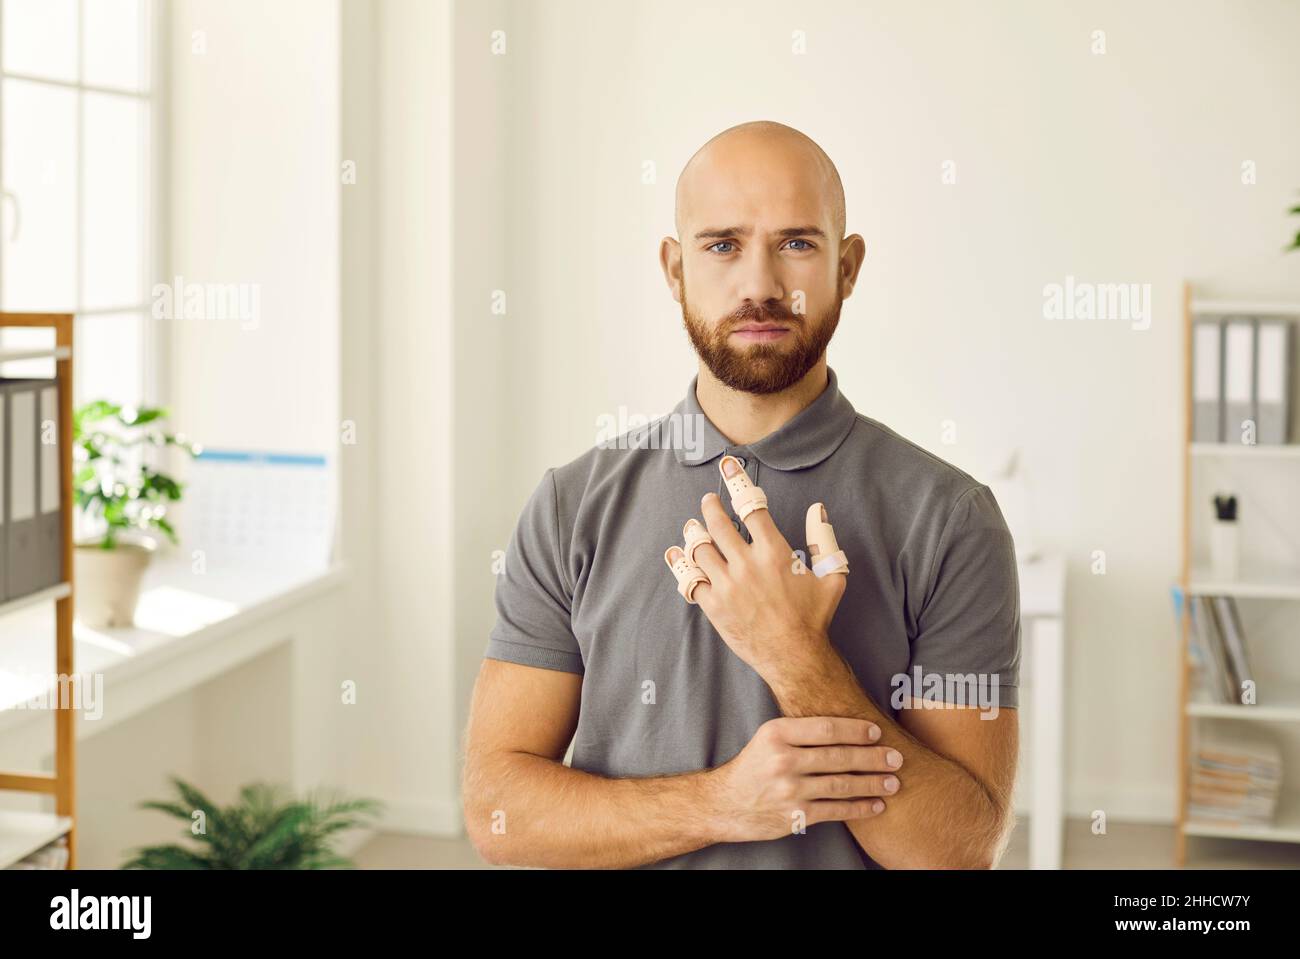 Portrait of sad man who has hurt his fingers and is now wearing adjustable finger splint braces. Stock Photo